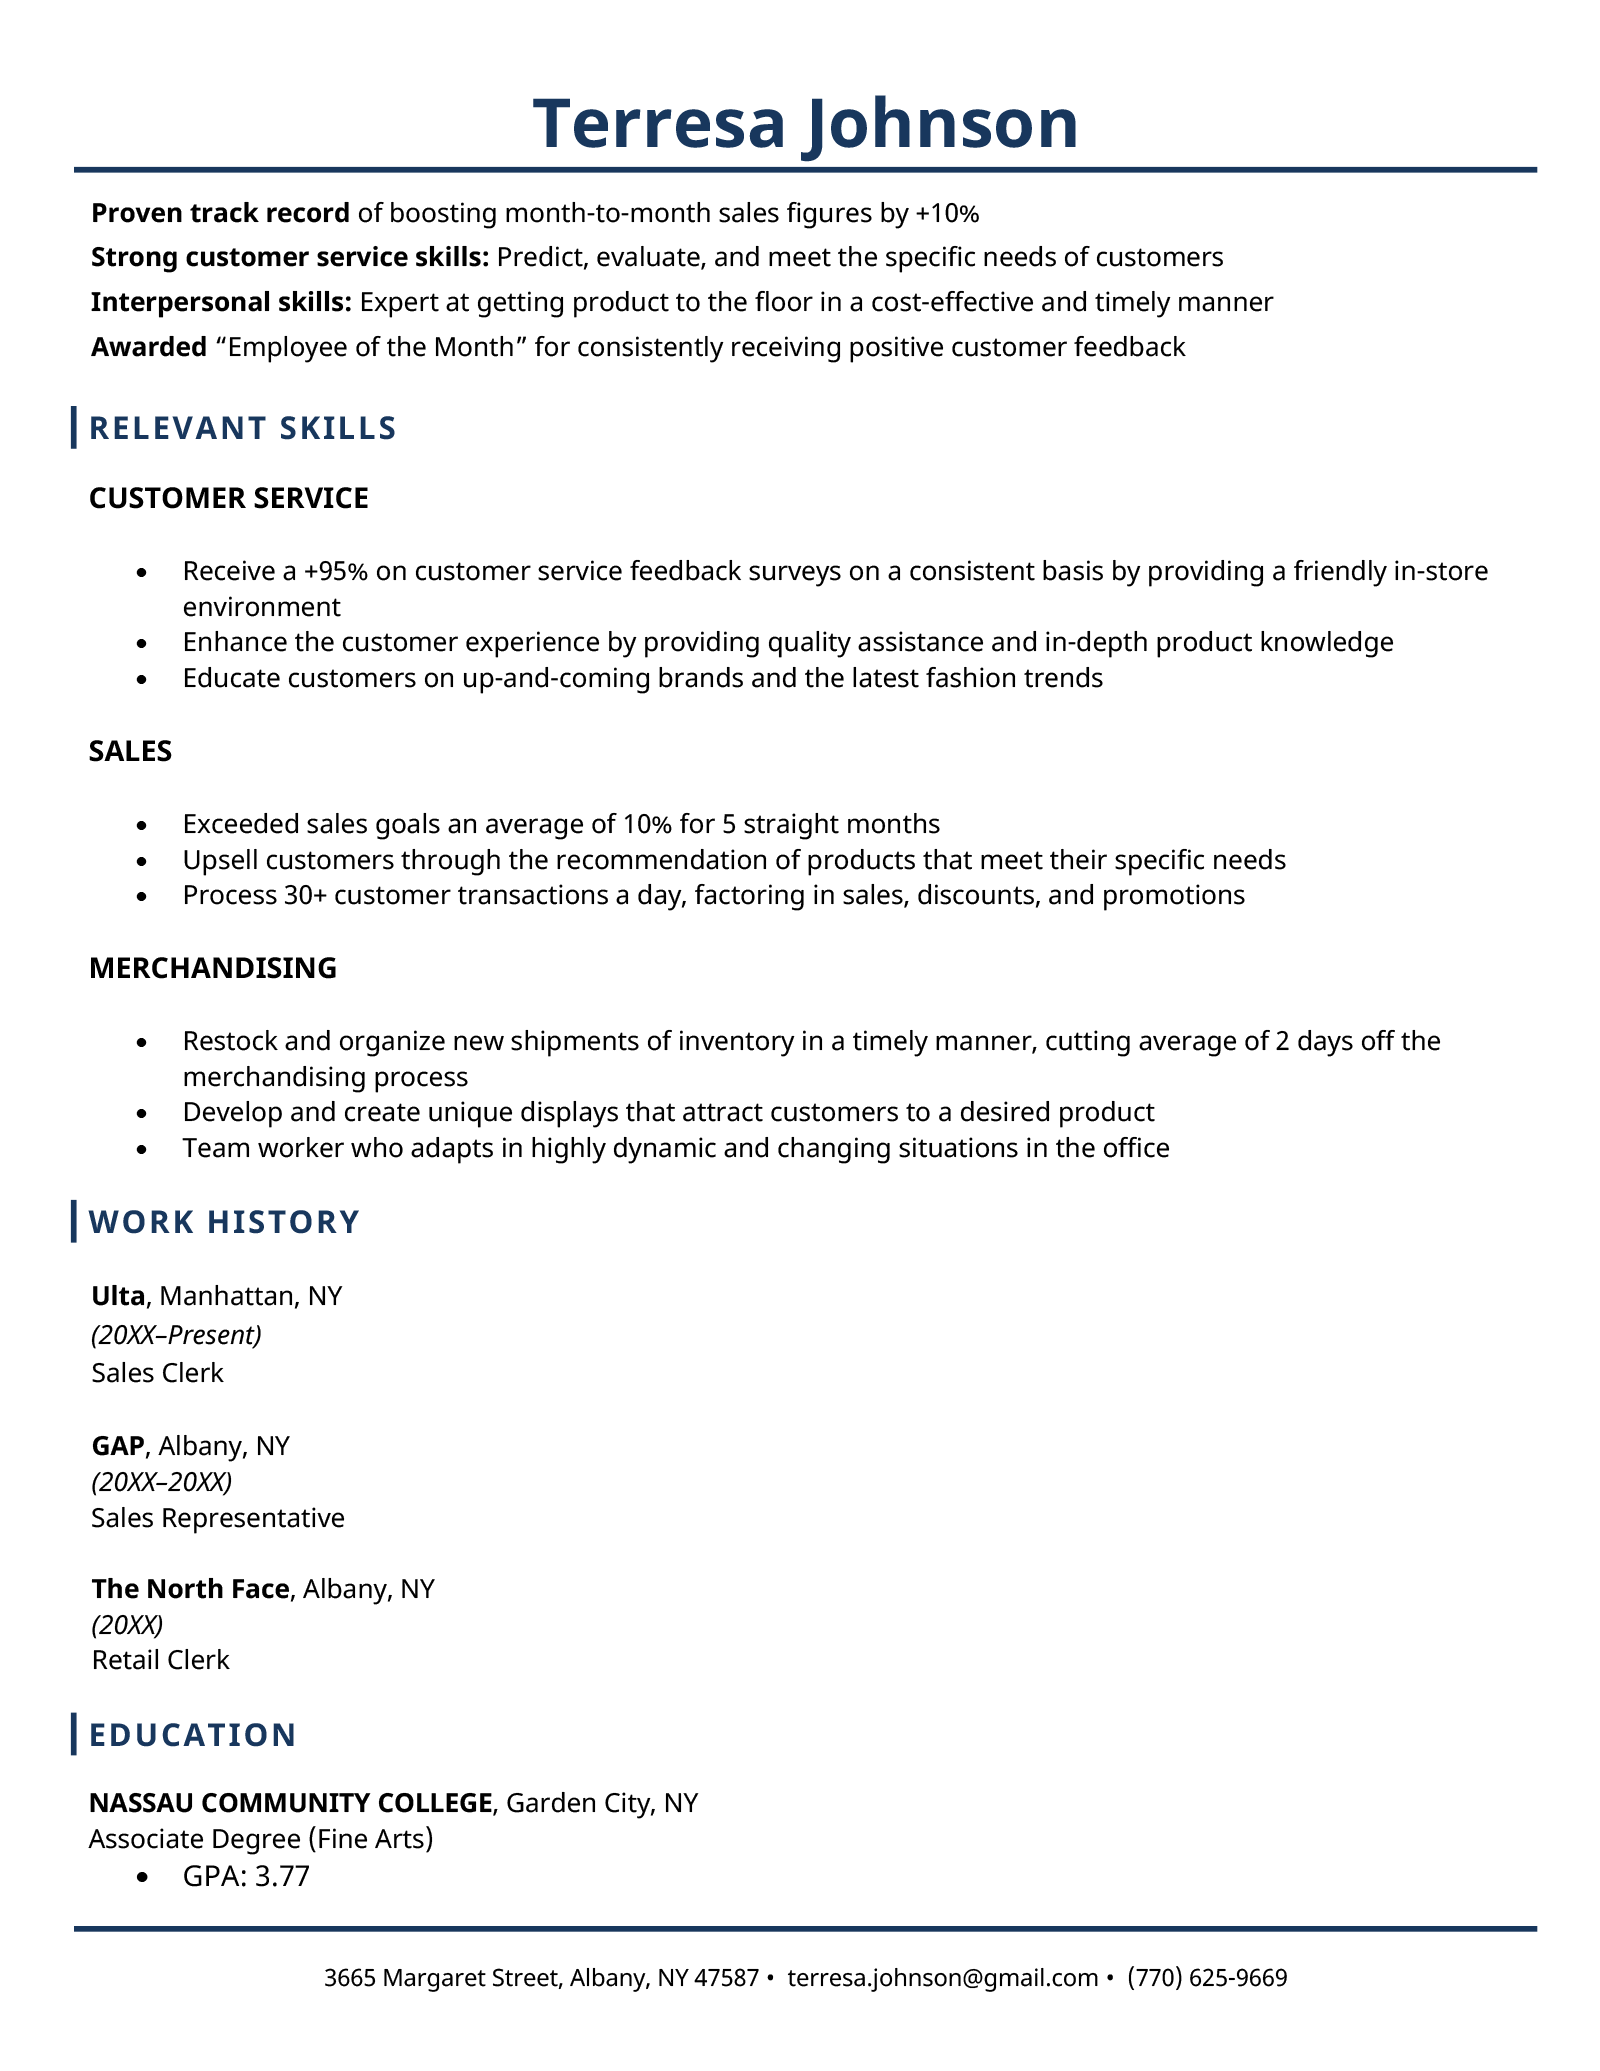 An image of a skills-forward resume for people who don't have 4-year degrees.